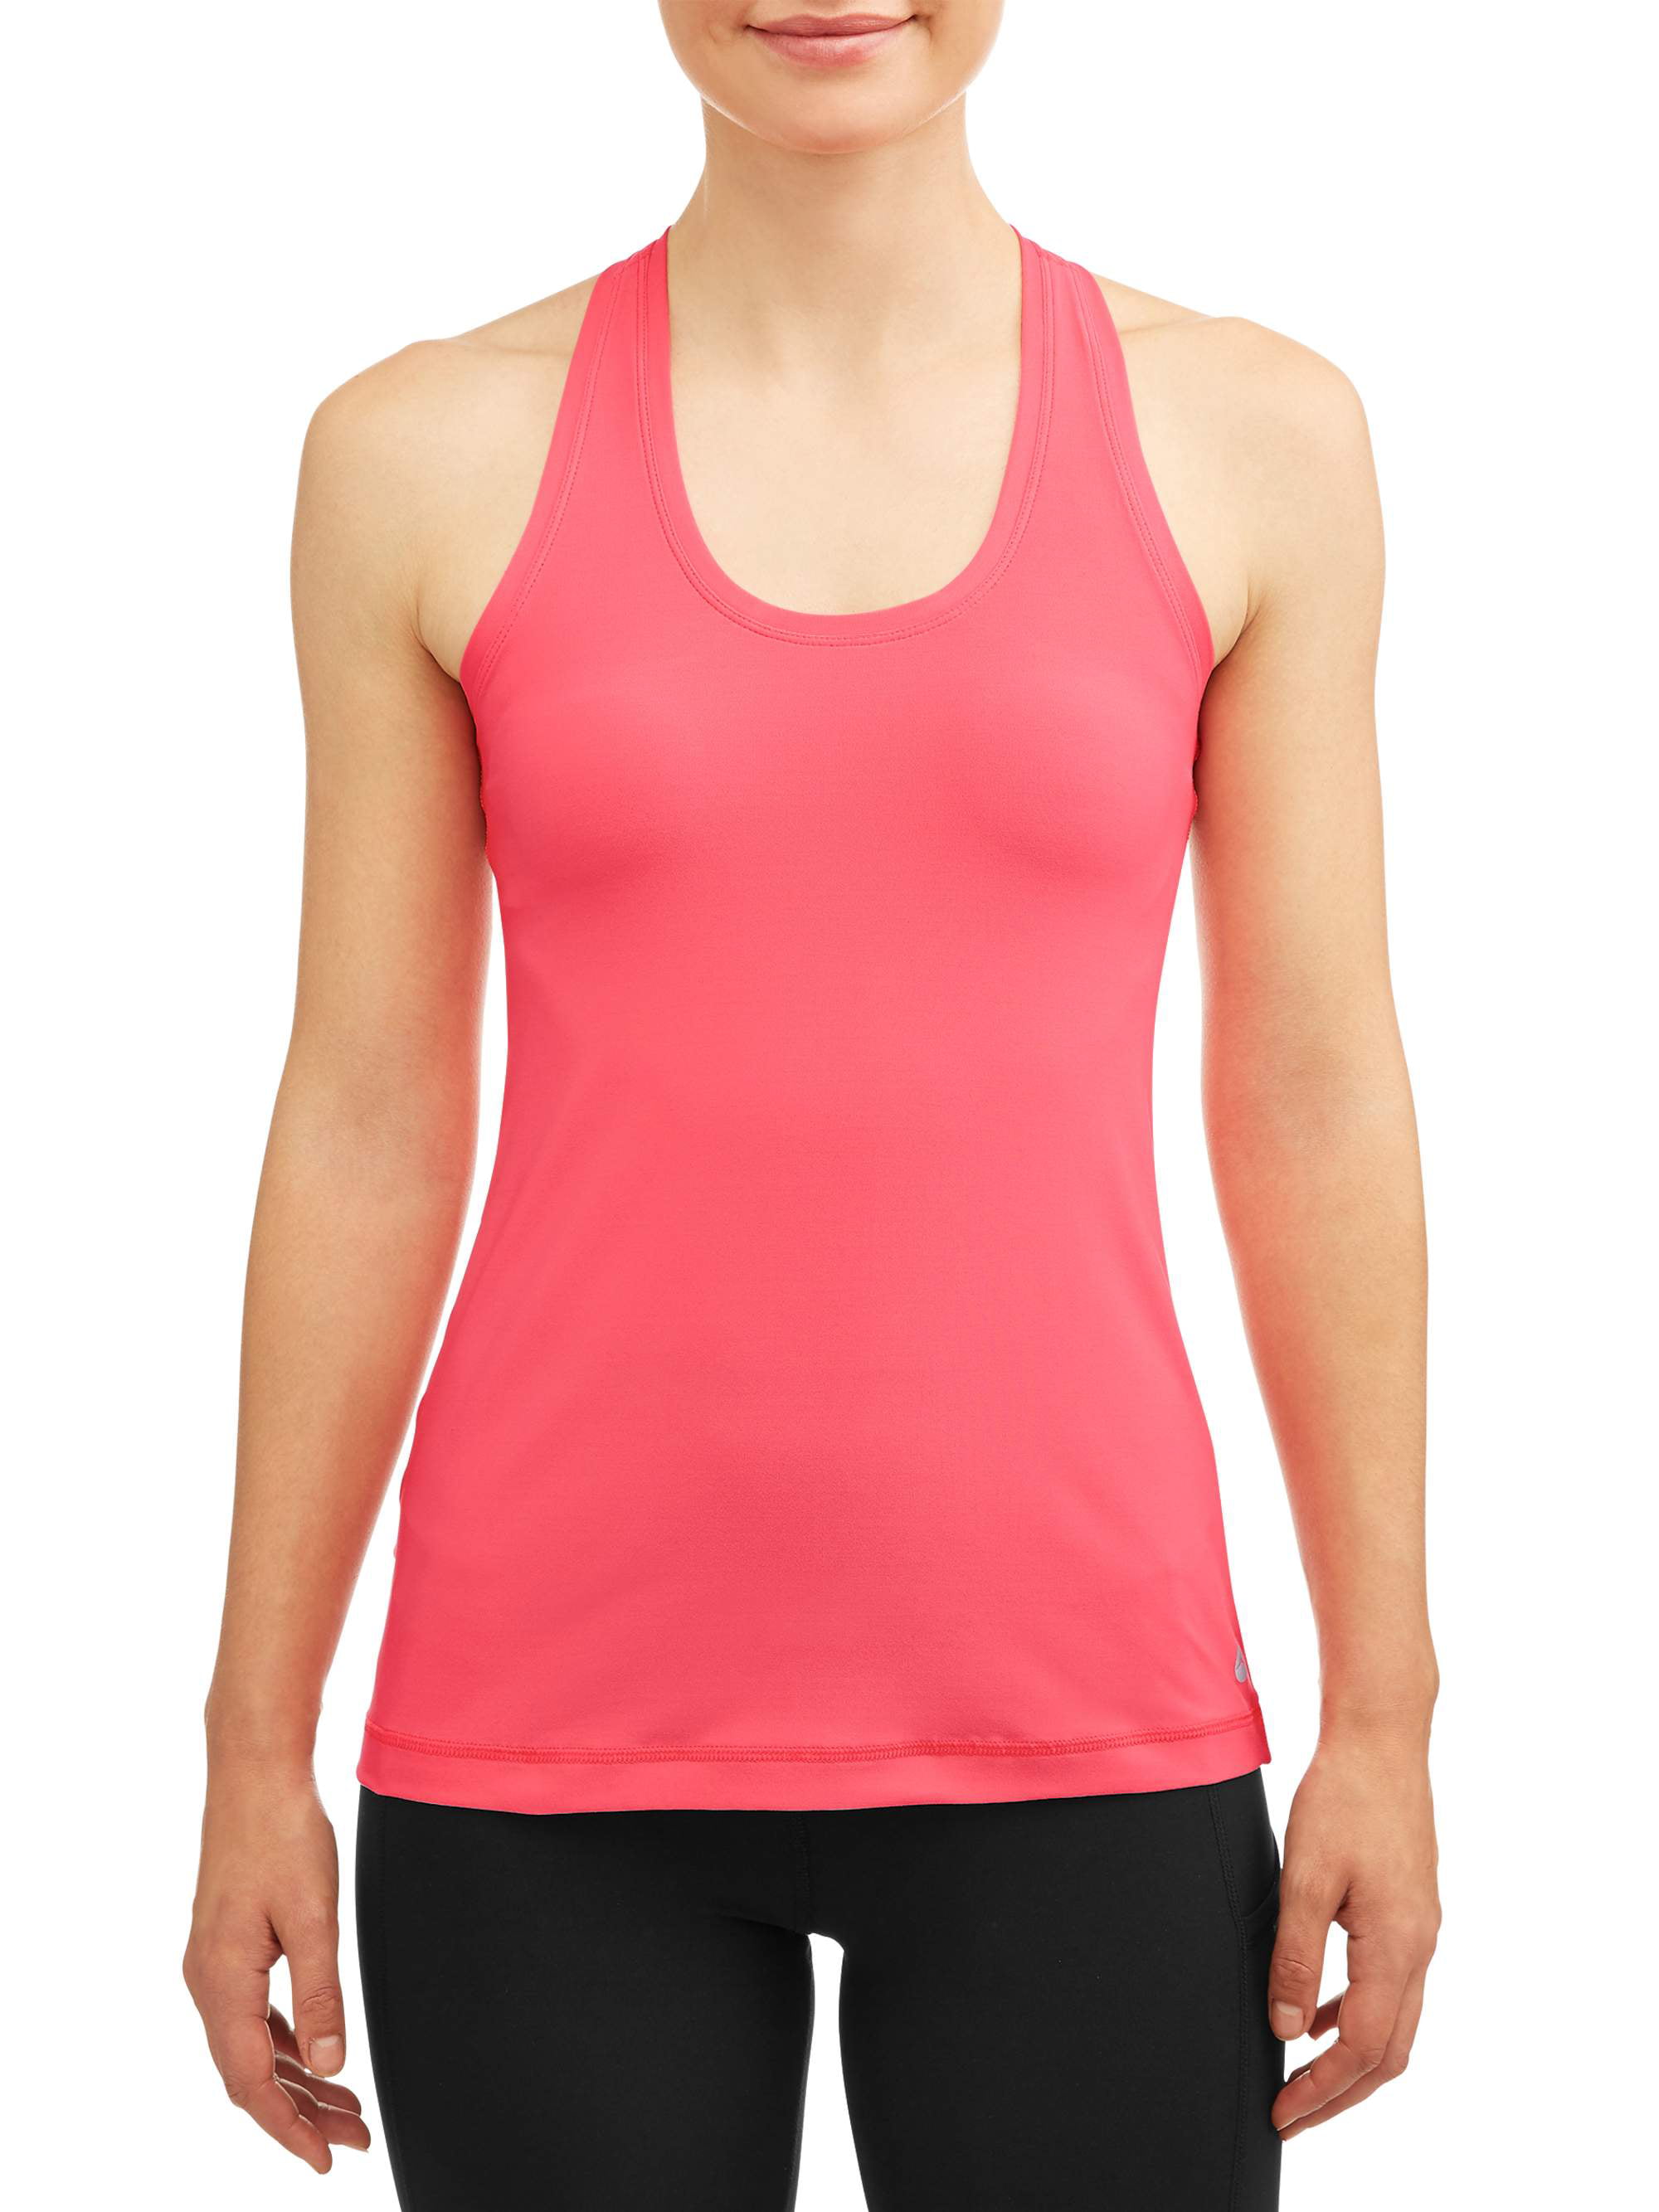 X by Gottex Women's Active Fitted Racer Back Tank Top 